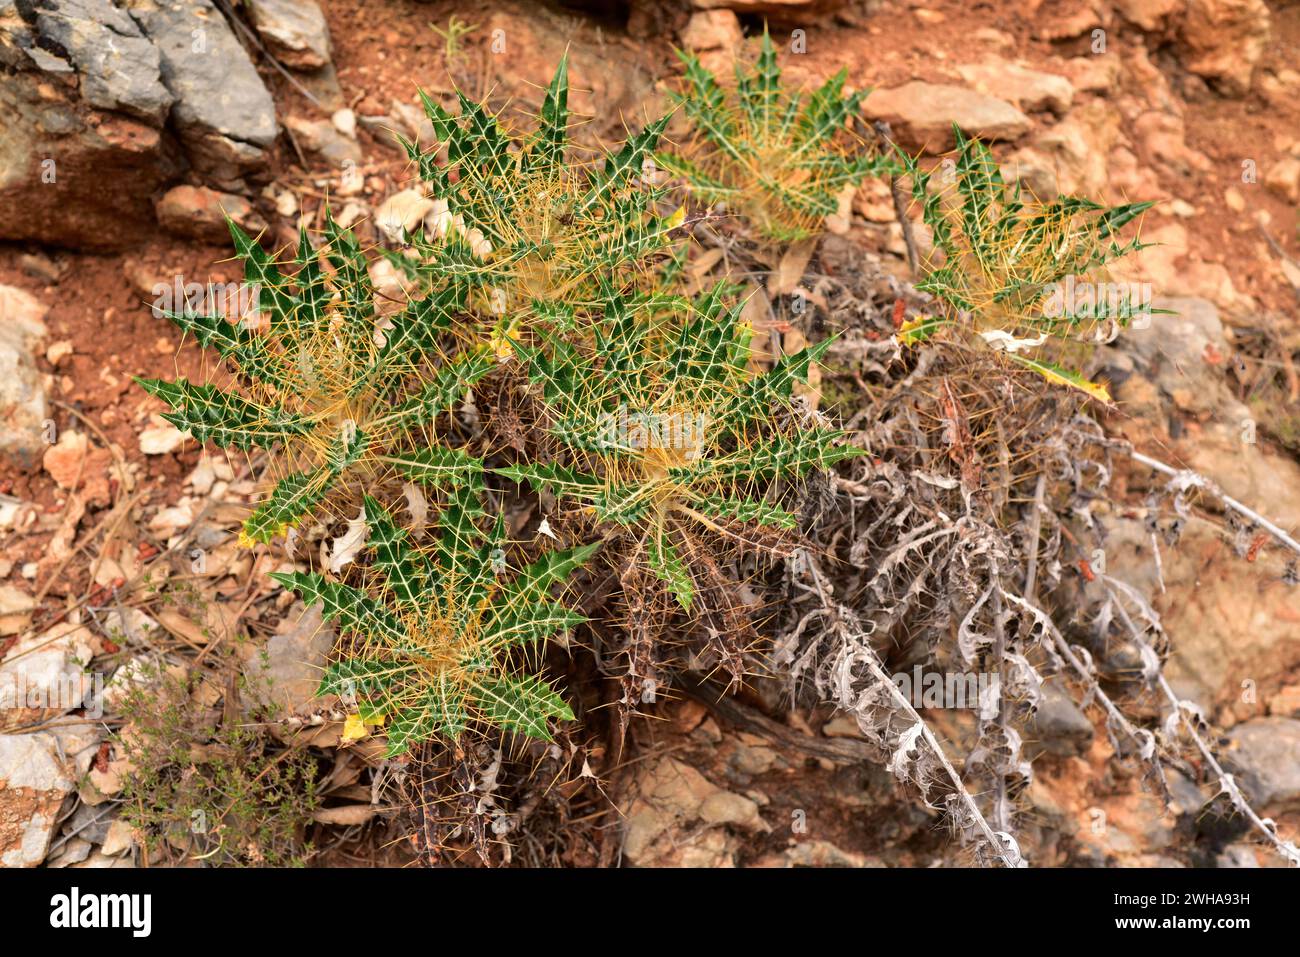 Ptilostemon hispanicus is a thorny perennial herb native to Spain. This photo was taken in Sierra de Cazorla Natural Park, Jaen province, Andalucia, S Stock Photo